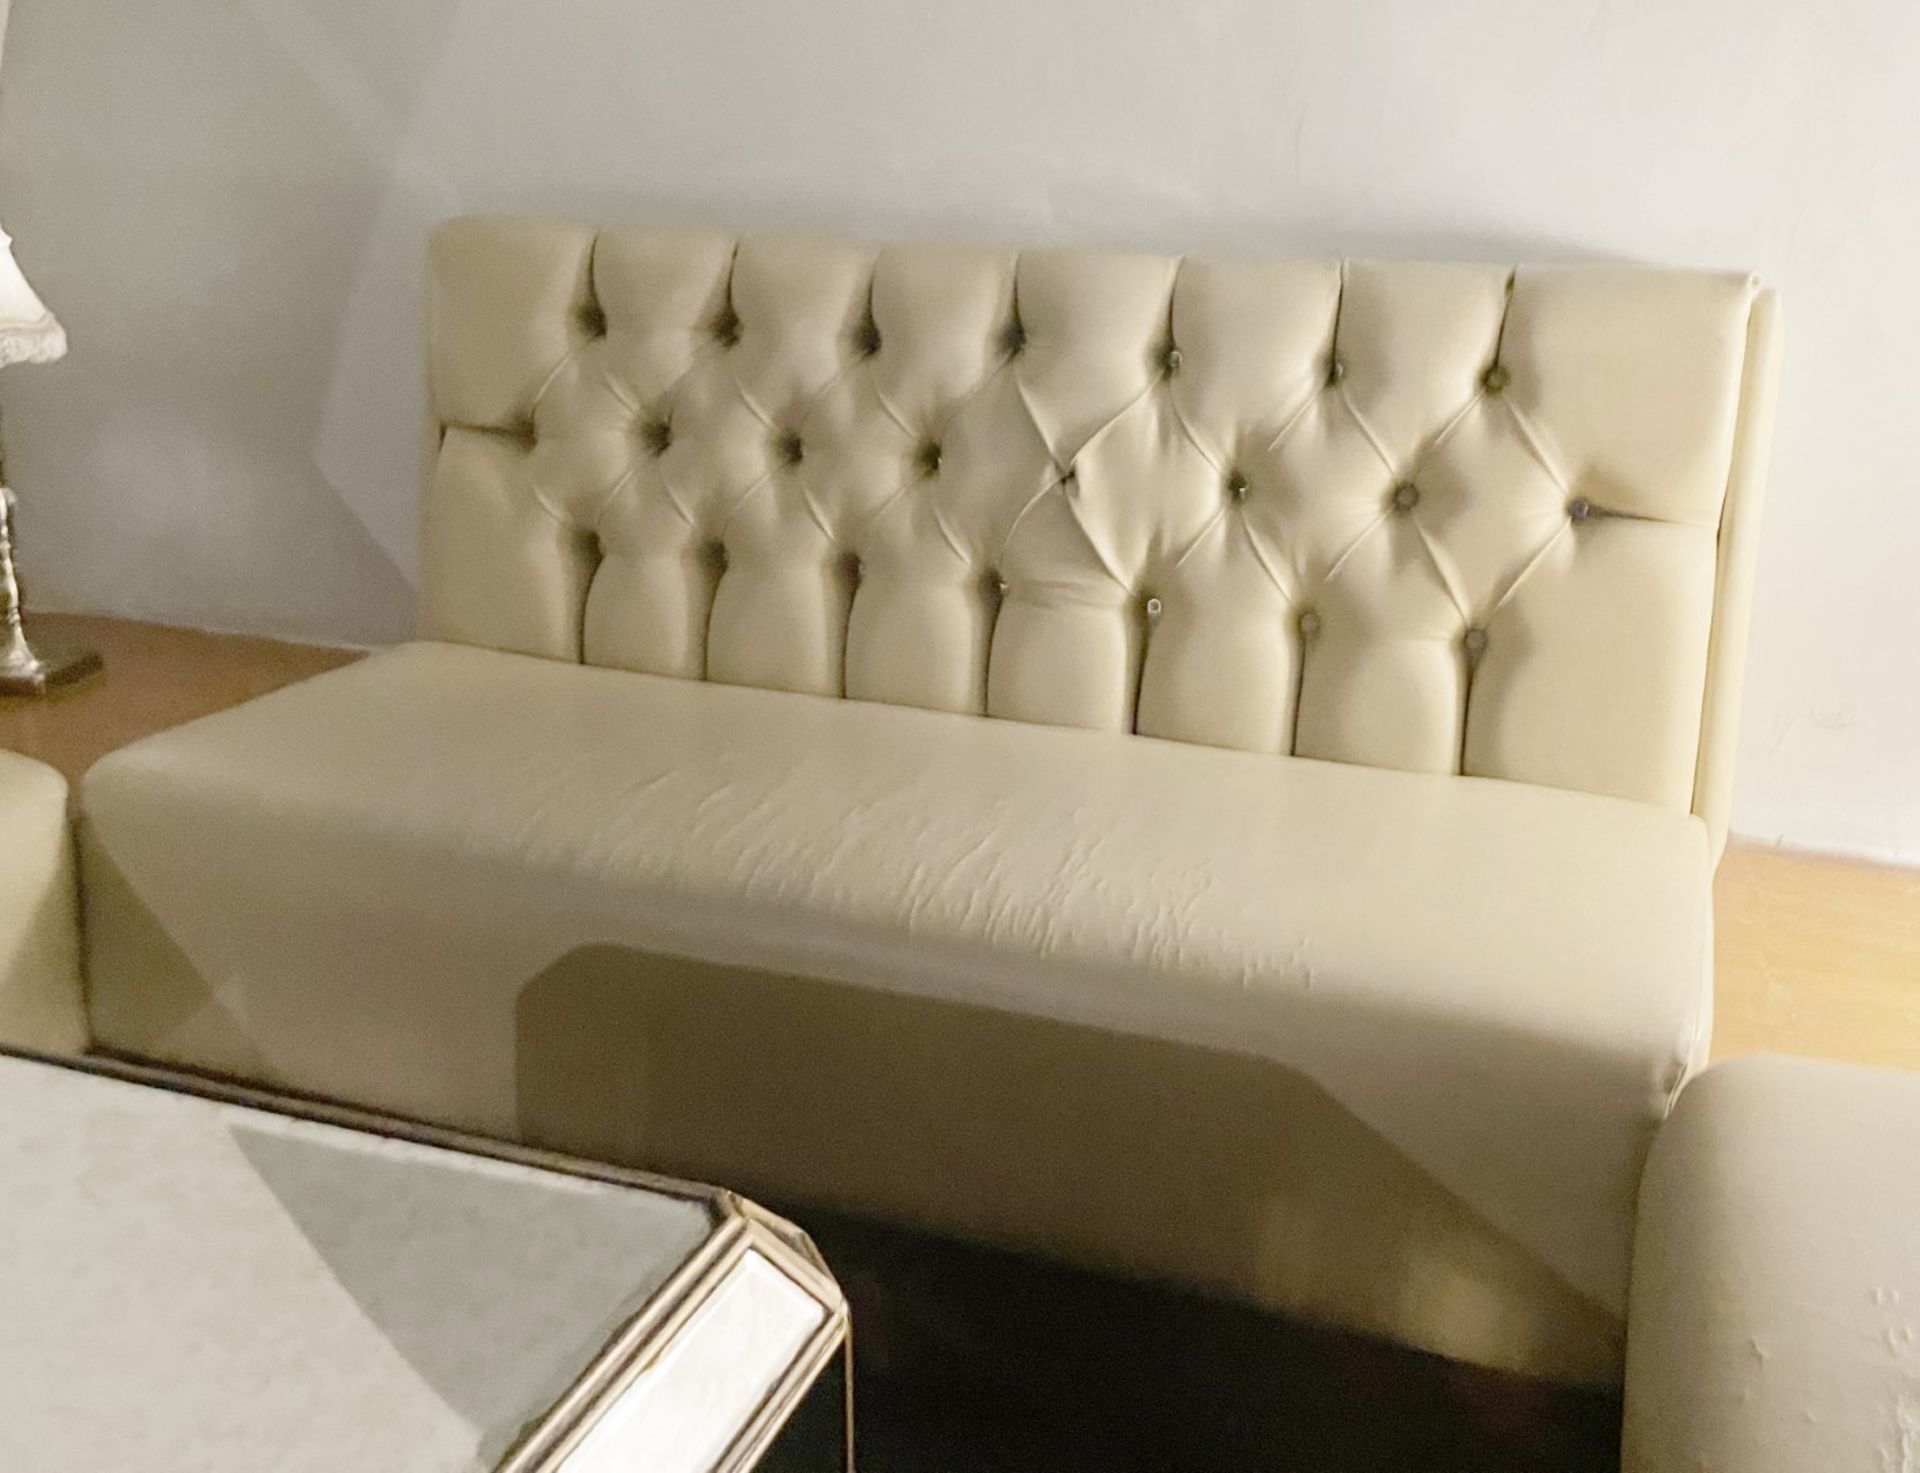 3 x Long Sections of Button Back Banquette Booth Seating Upholstered in a Cream Faux Leather - Image 5 of 8